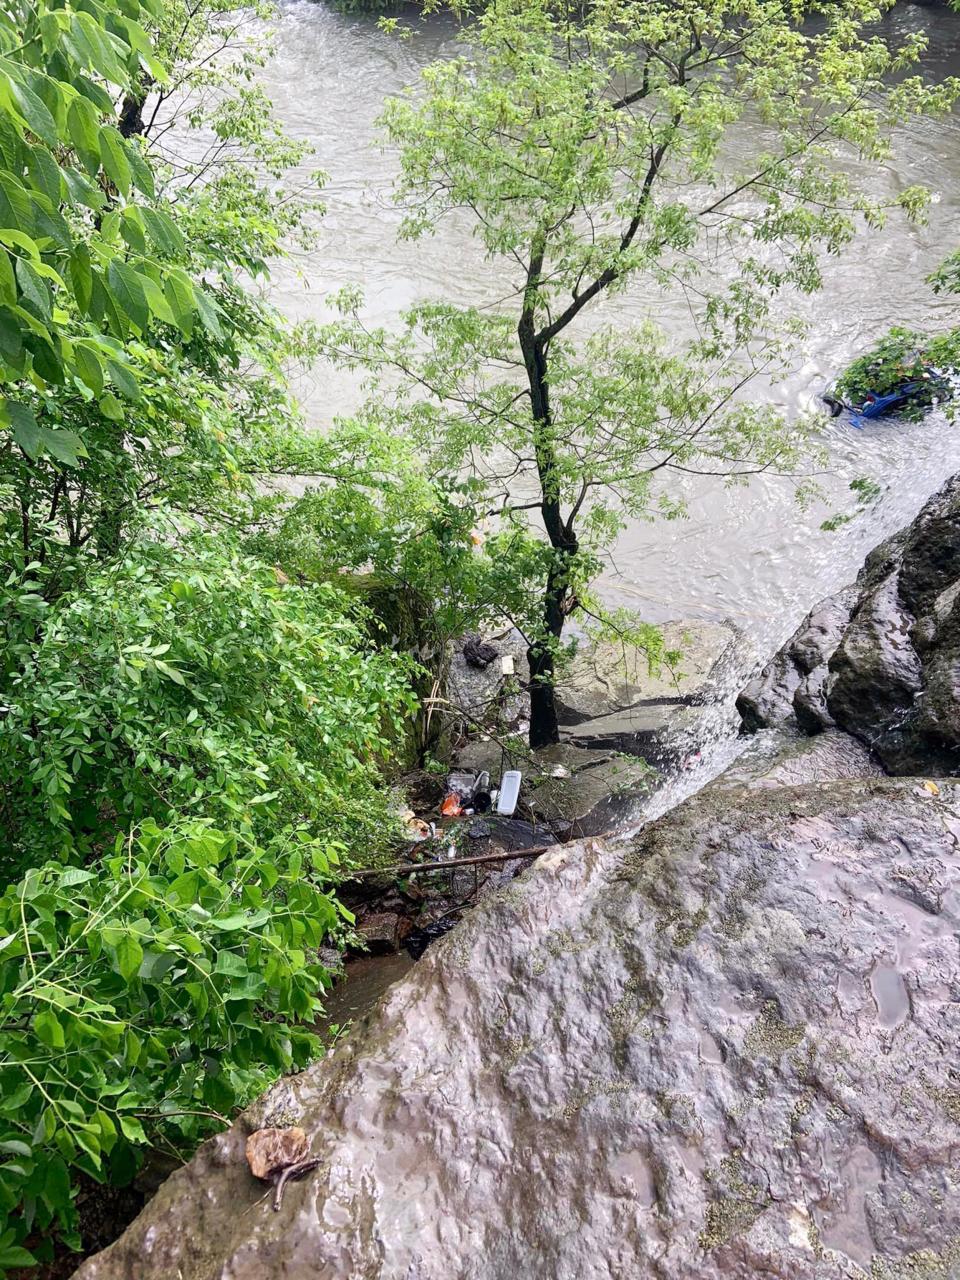 A view from top of the bluff at Natural Dam, Arkansas, where Mark Girdner's Baja Bug took a tumble and ended up in the flooded creek below. The Bug can be seen on the right side of the picture behind the tree limbs.